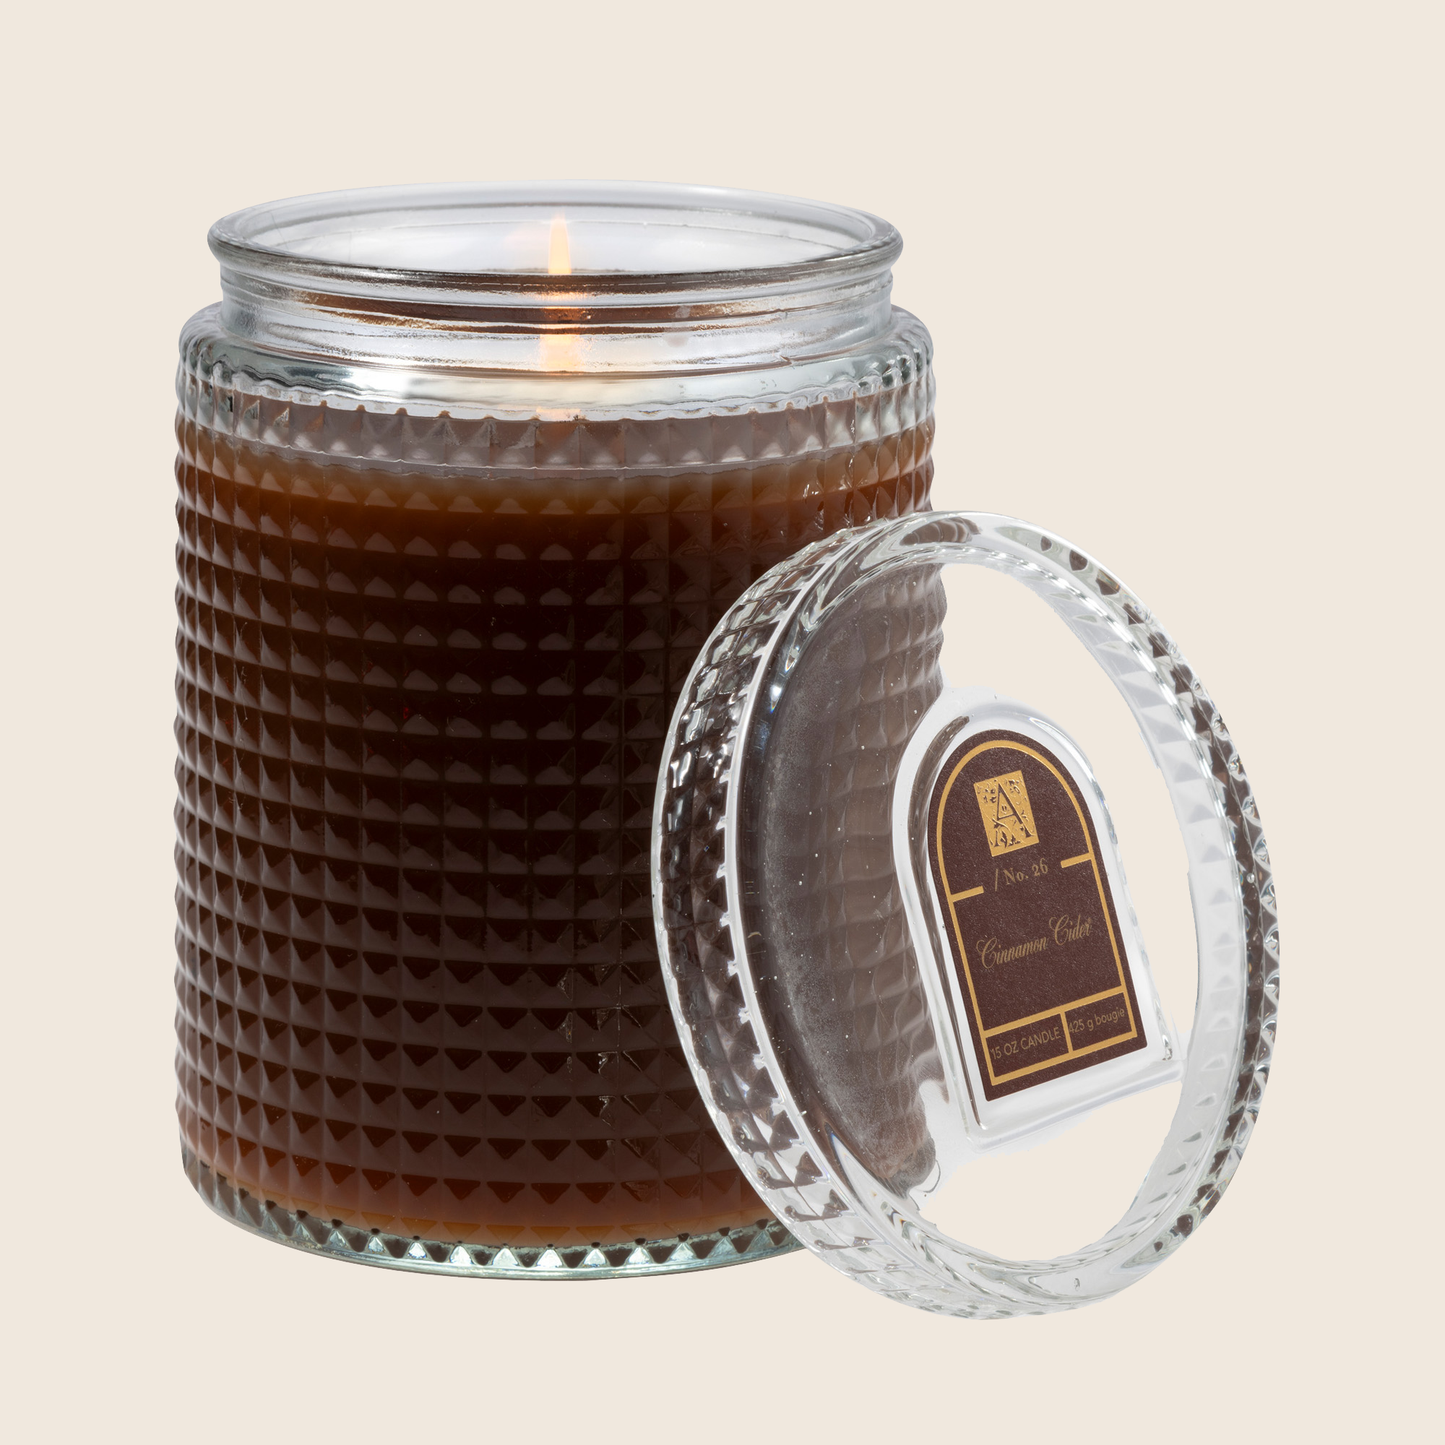 cinnamon cider - Textured Glass Candle with Lid